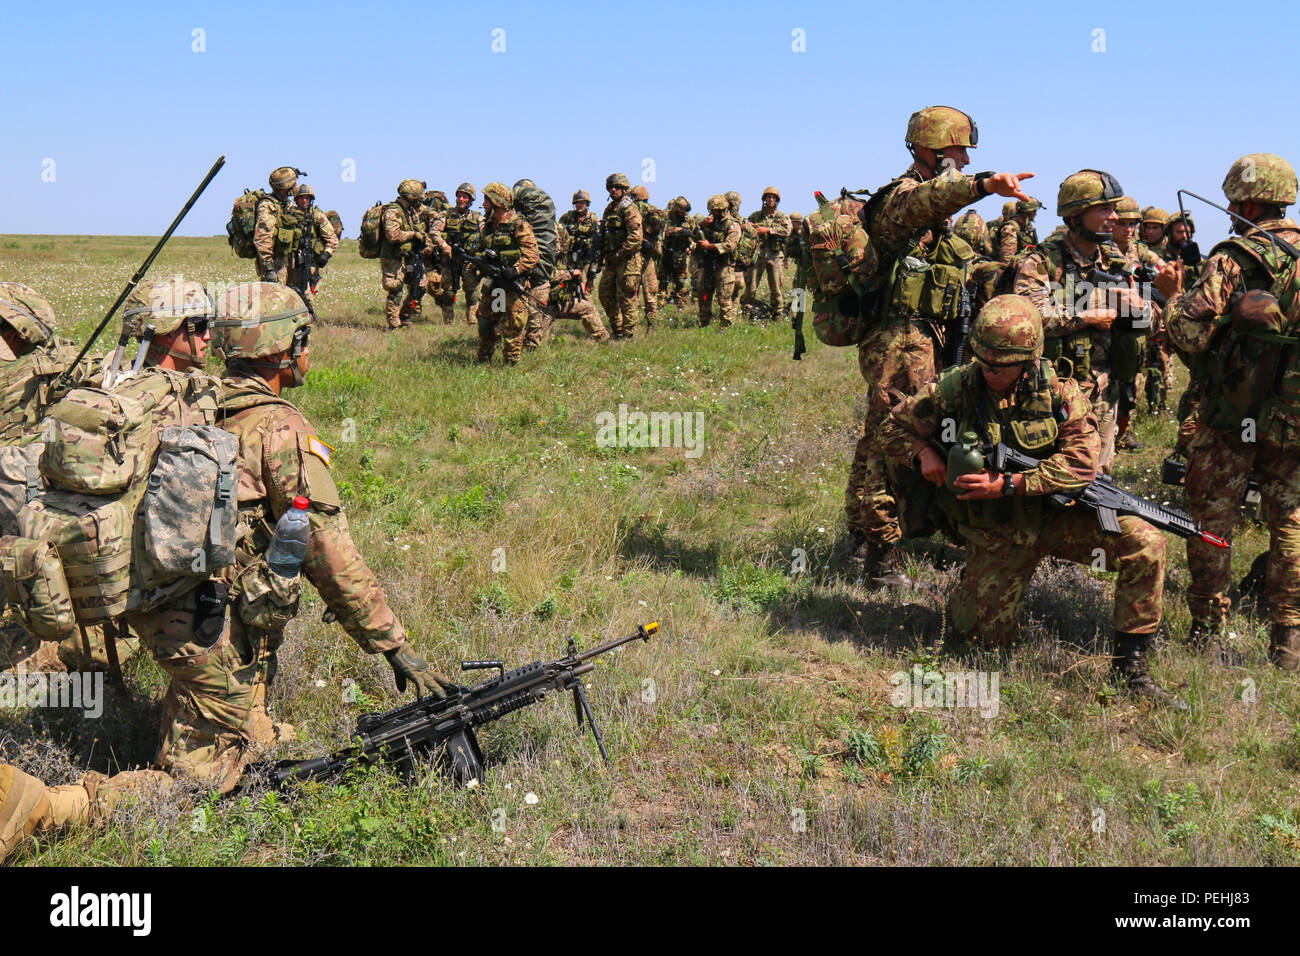 Paratroopers From The U S Army And Italian Army Take A Knee And Coordinate Movement On Balchik Air Base Bulgaria During Swift Response 15 Aug 25 15 Swift Response 15 Is A Large Scale